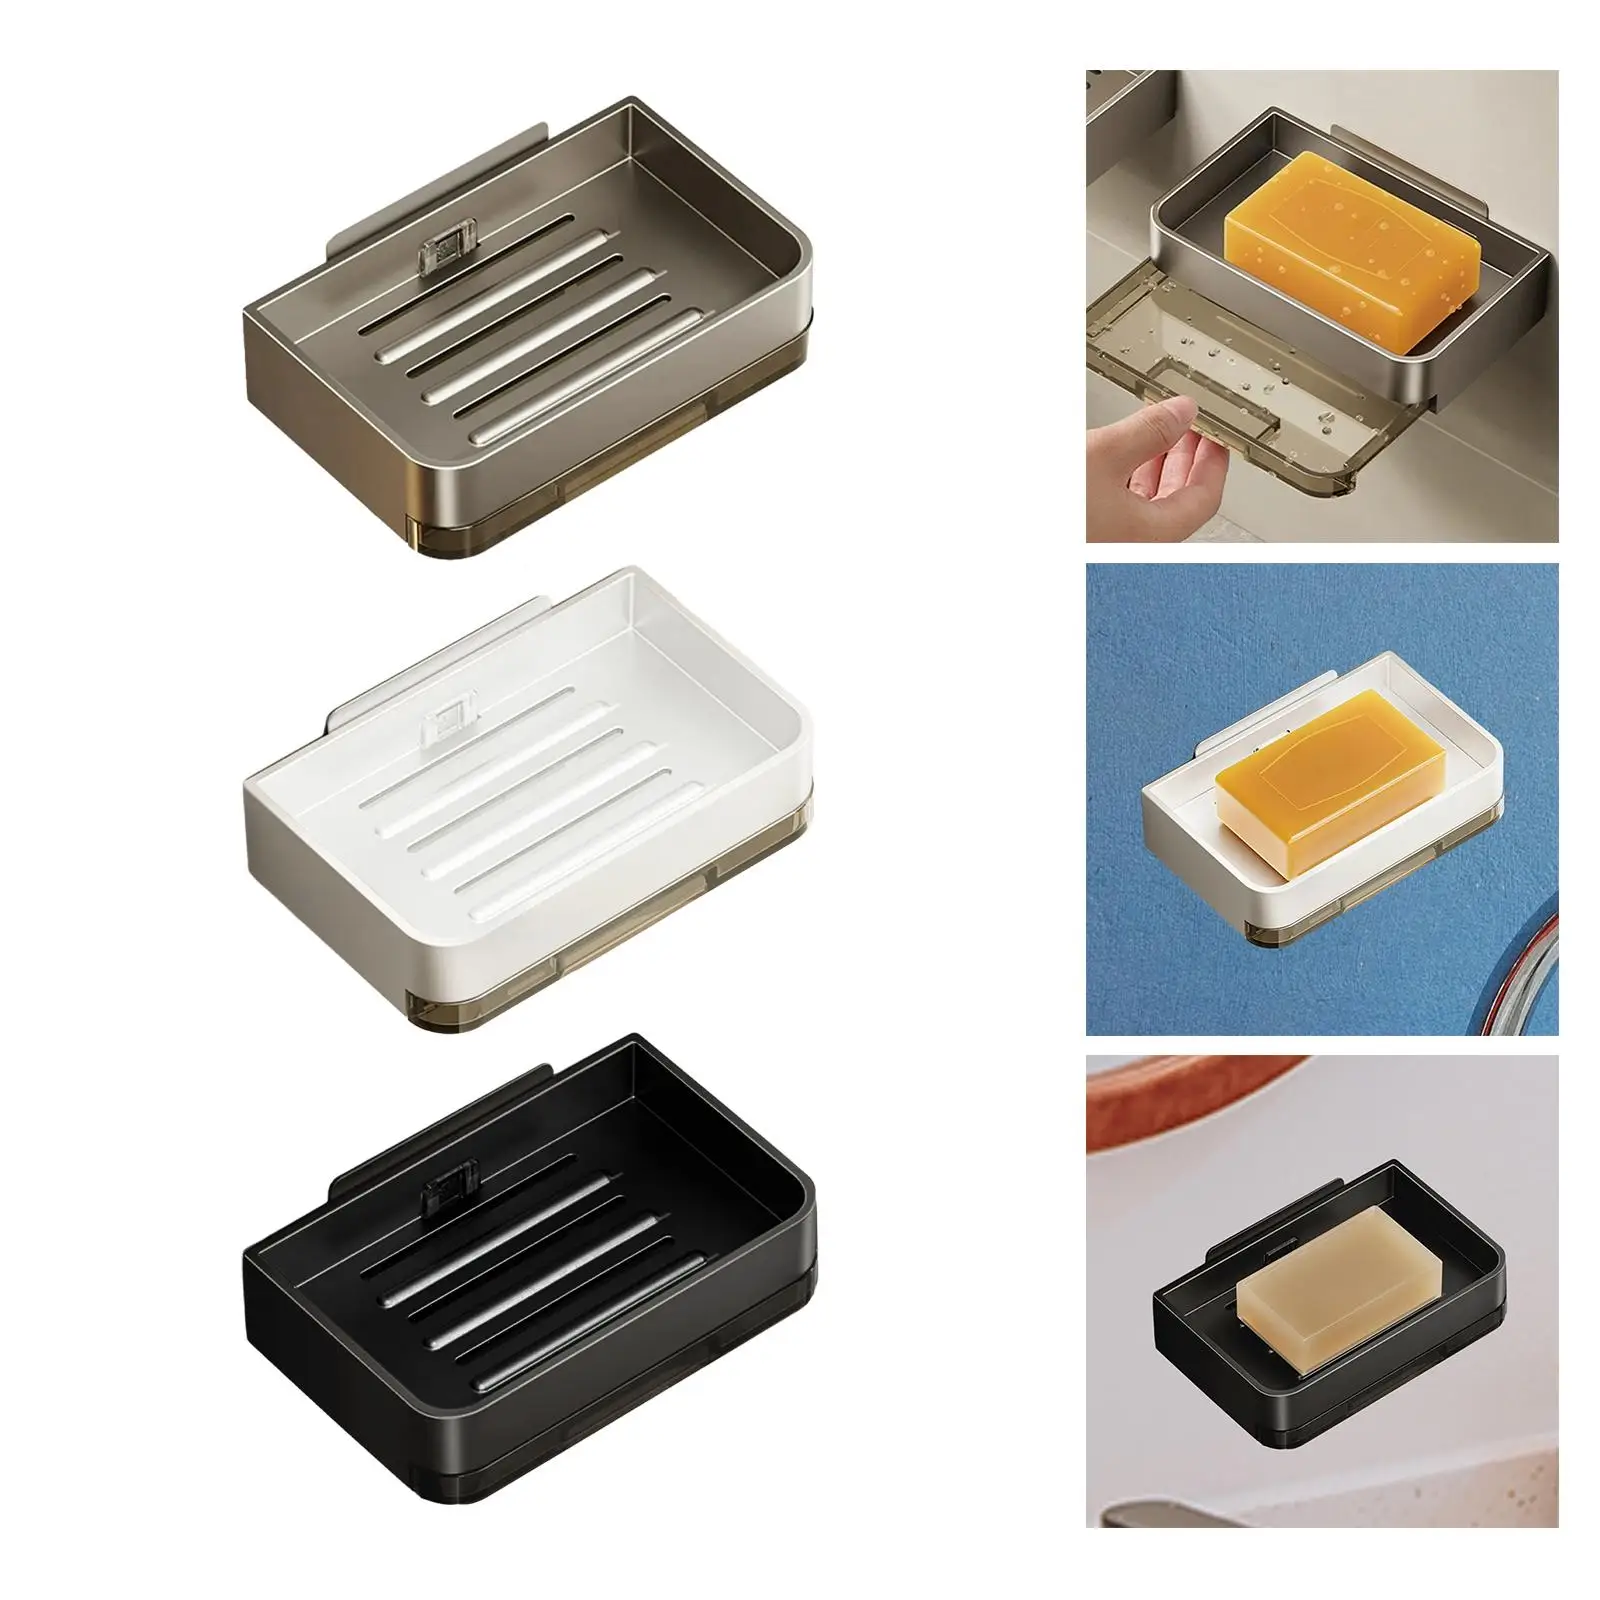 Bathroom Soap Dish Stylish Soap Saver Wall Mounted Soap Tray Self Draining for Hotel Shower Wall Kitchen Bathroom No Punching